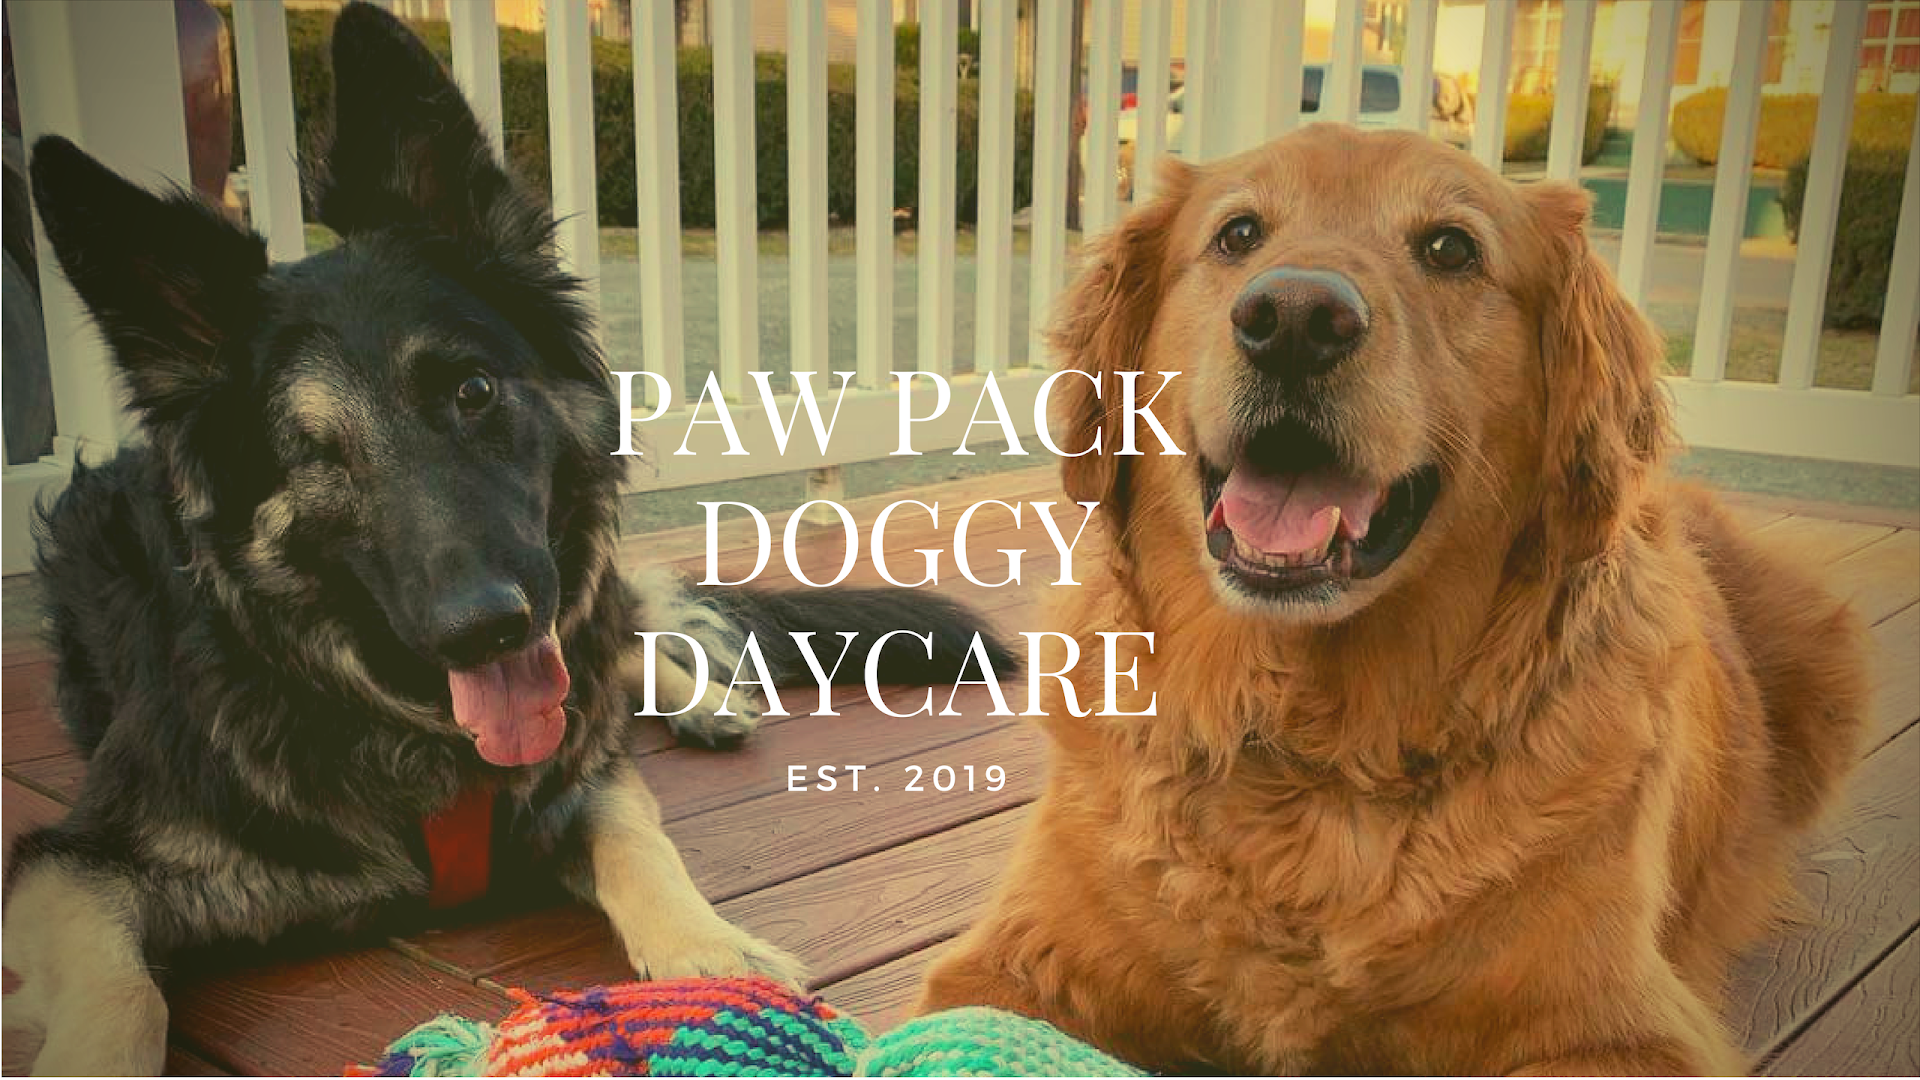 Paw Pack Doggy Daycare